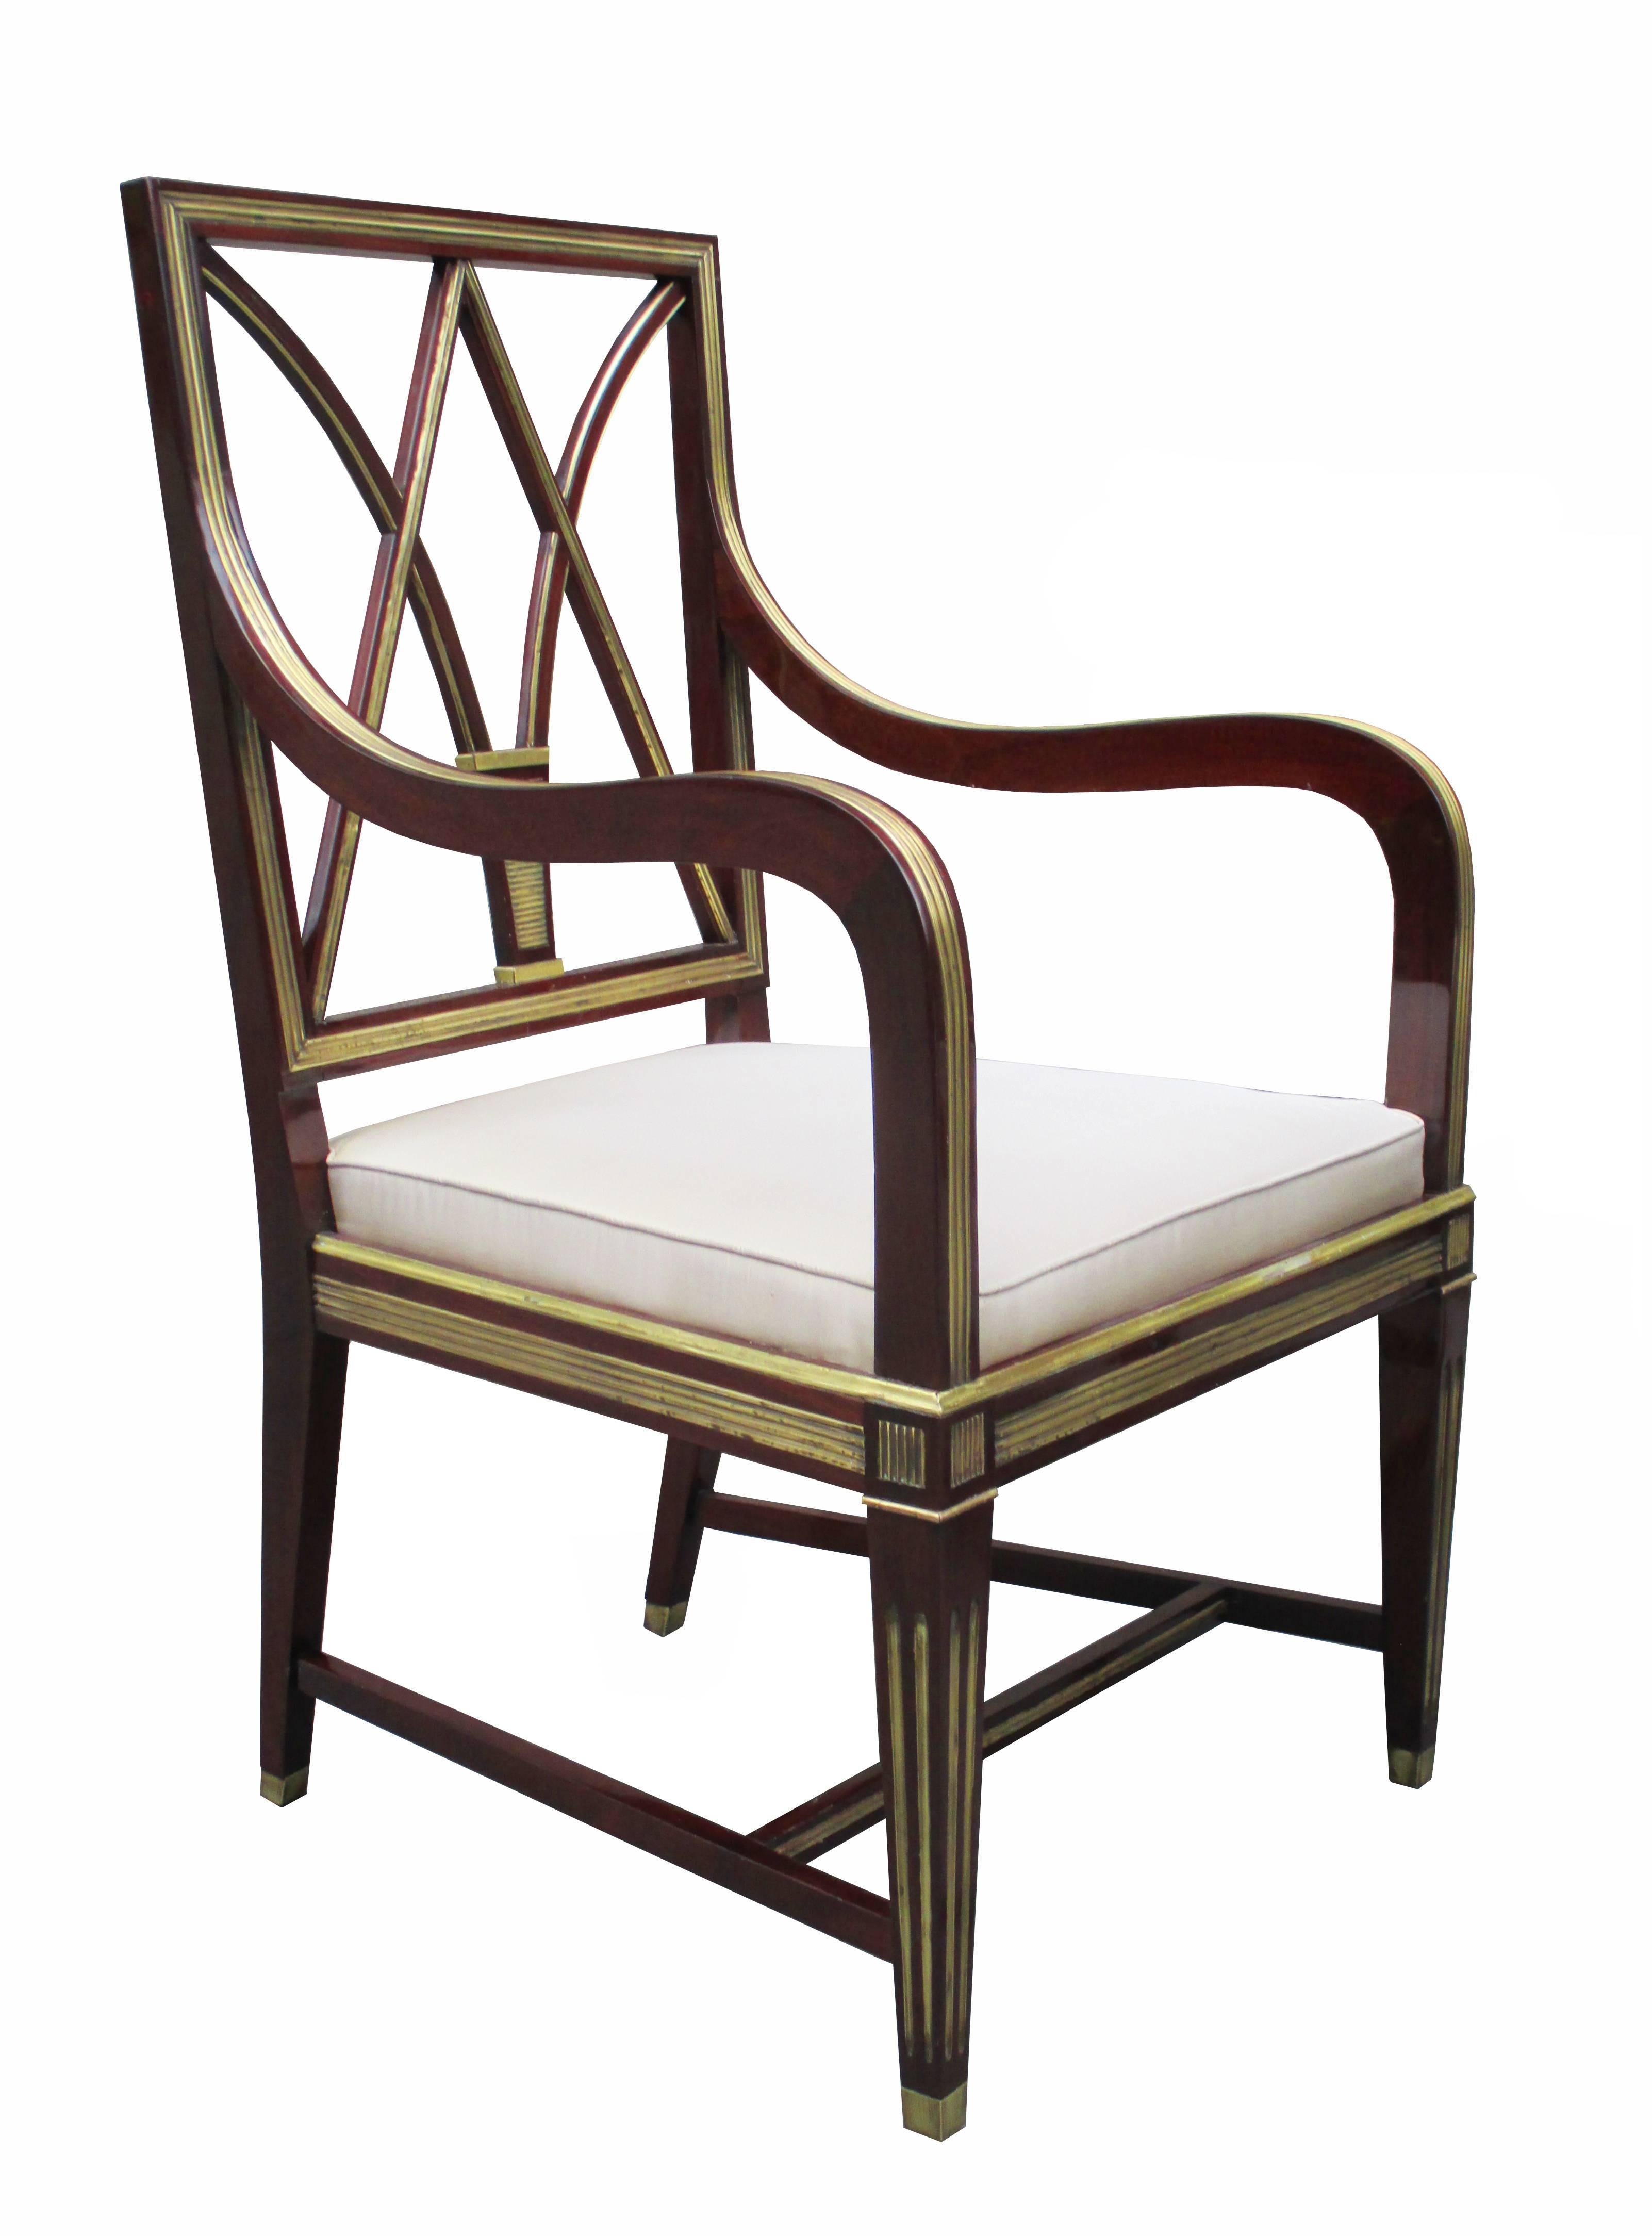 A fine pair of neoclassical armchairs.
Mahogany with patinated brass inlay, 
details and sabots.

Full Restoration by us.